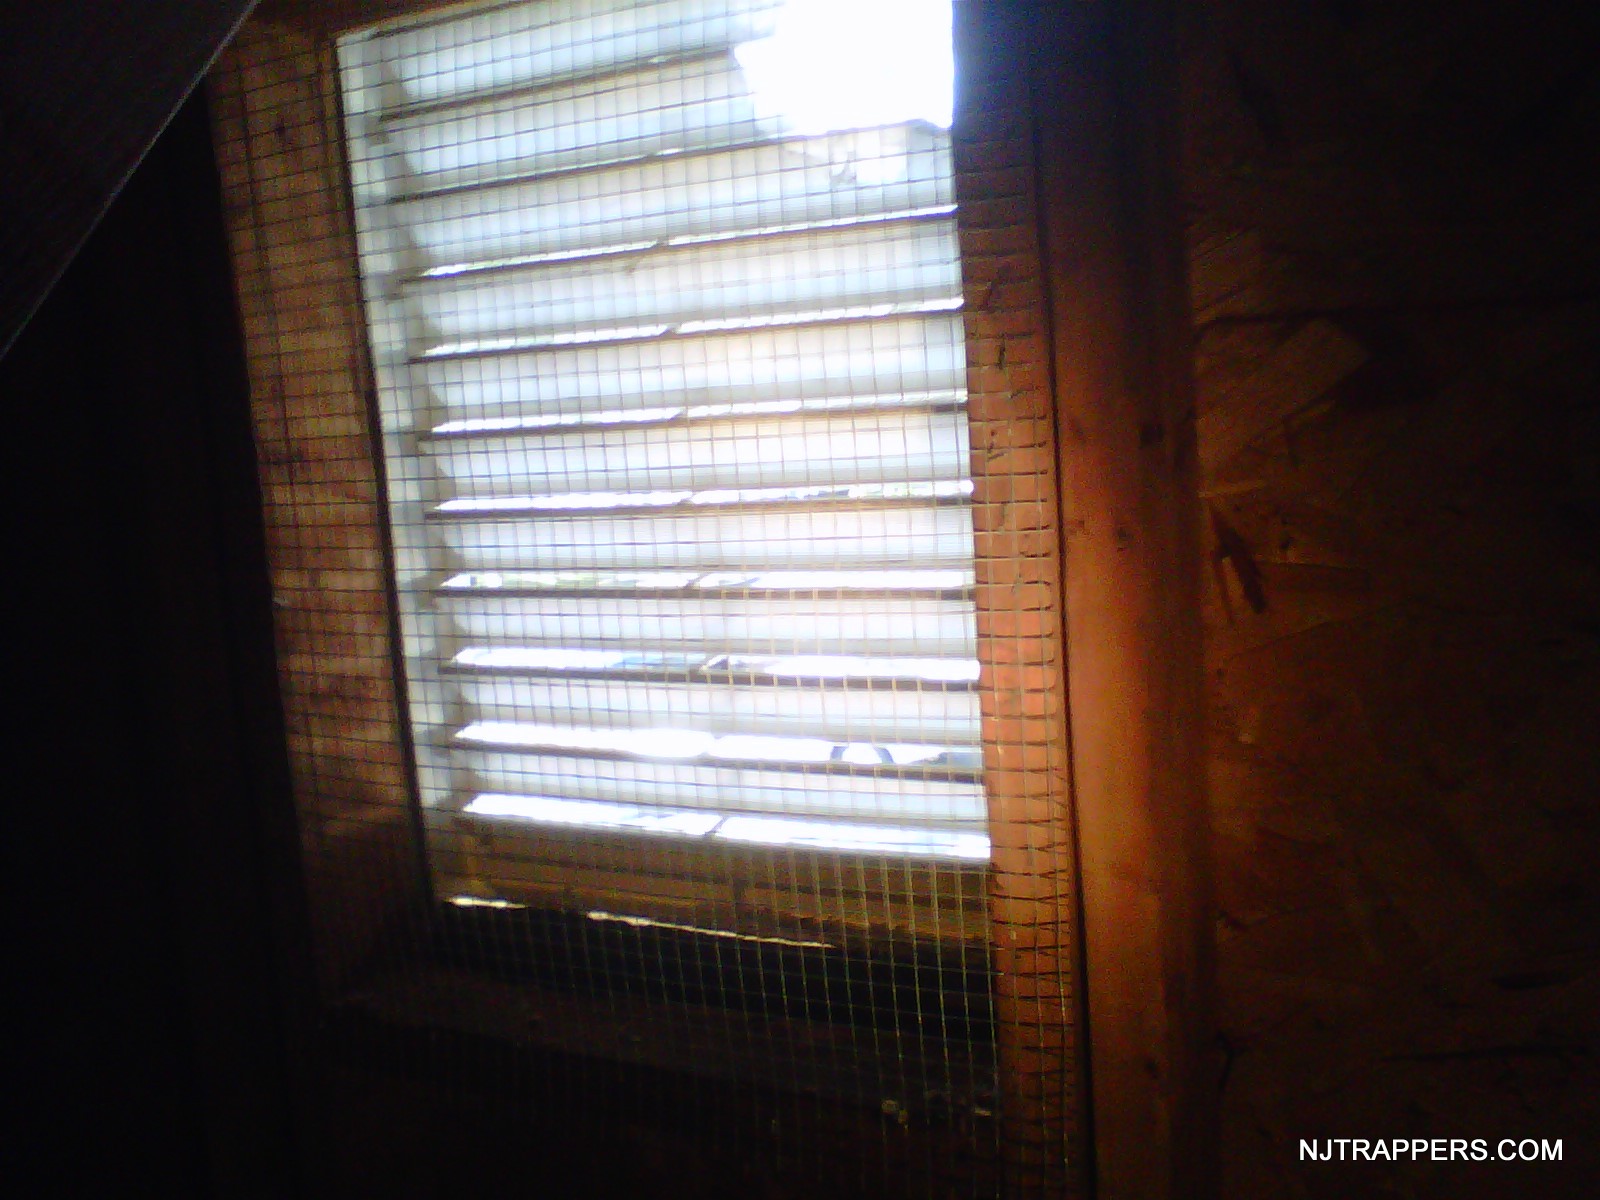 NJ Trappers » Attic and Gable Vent Screens